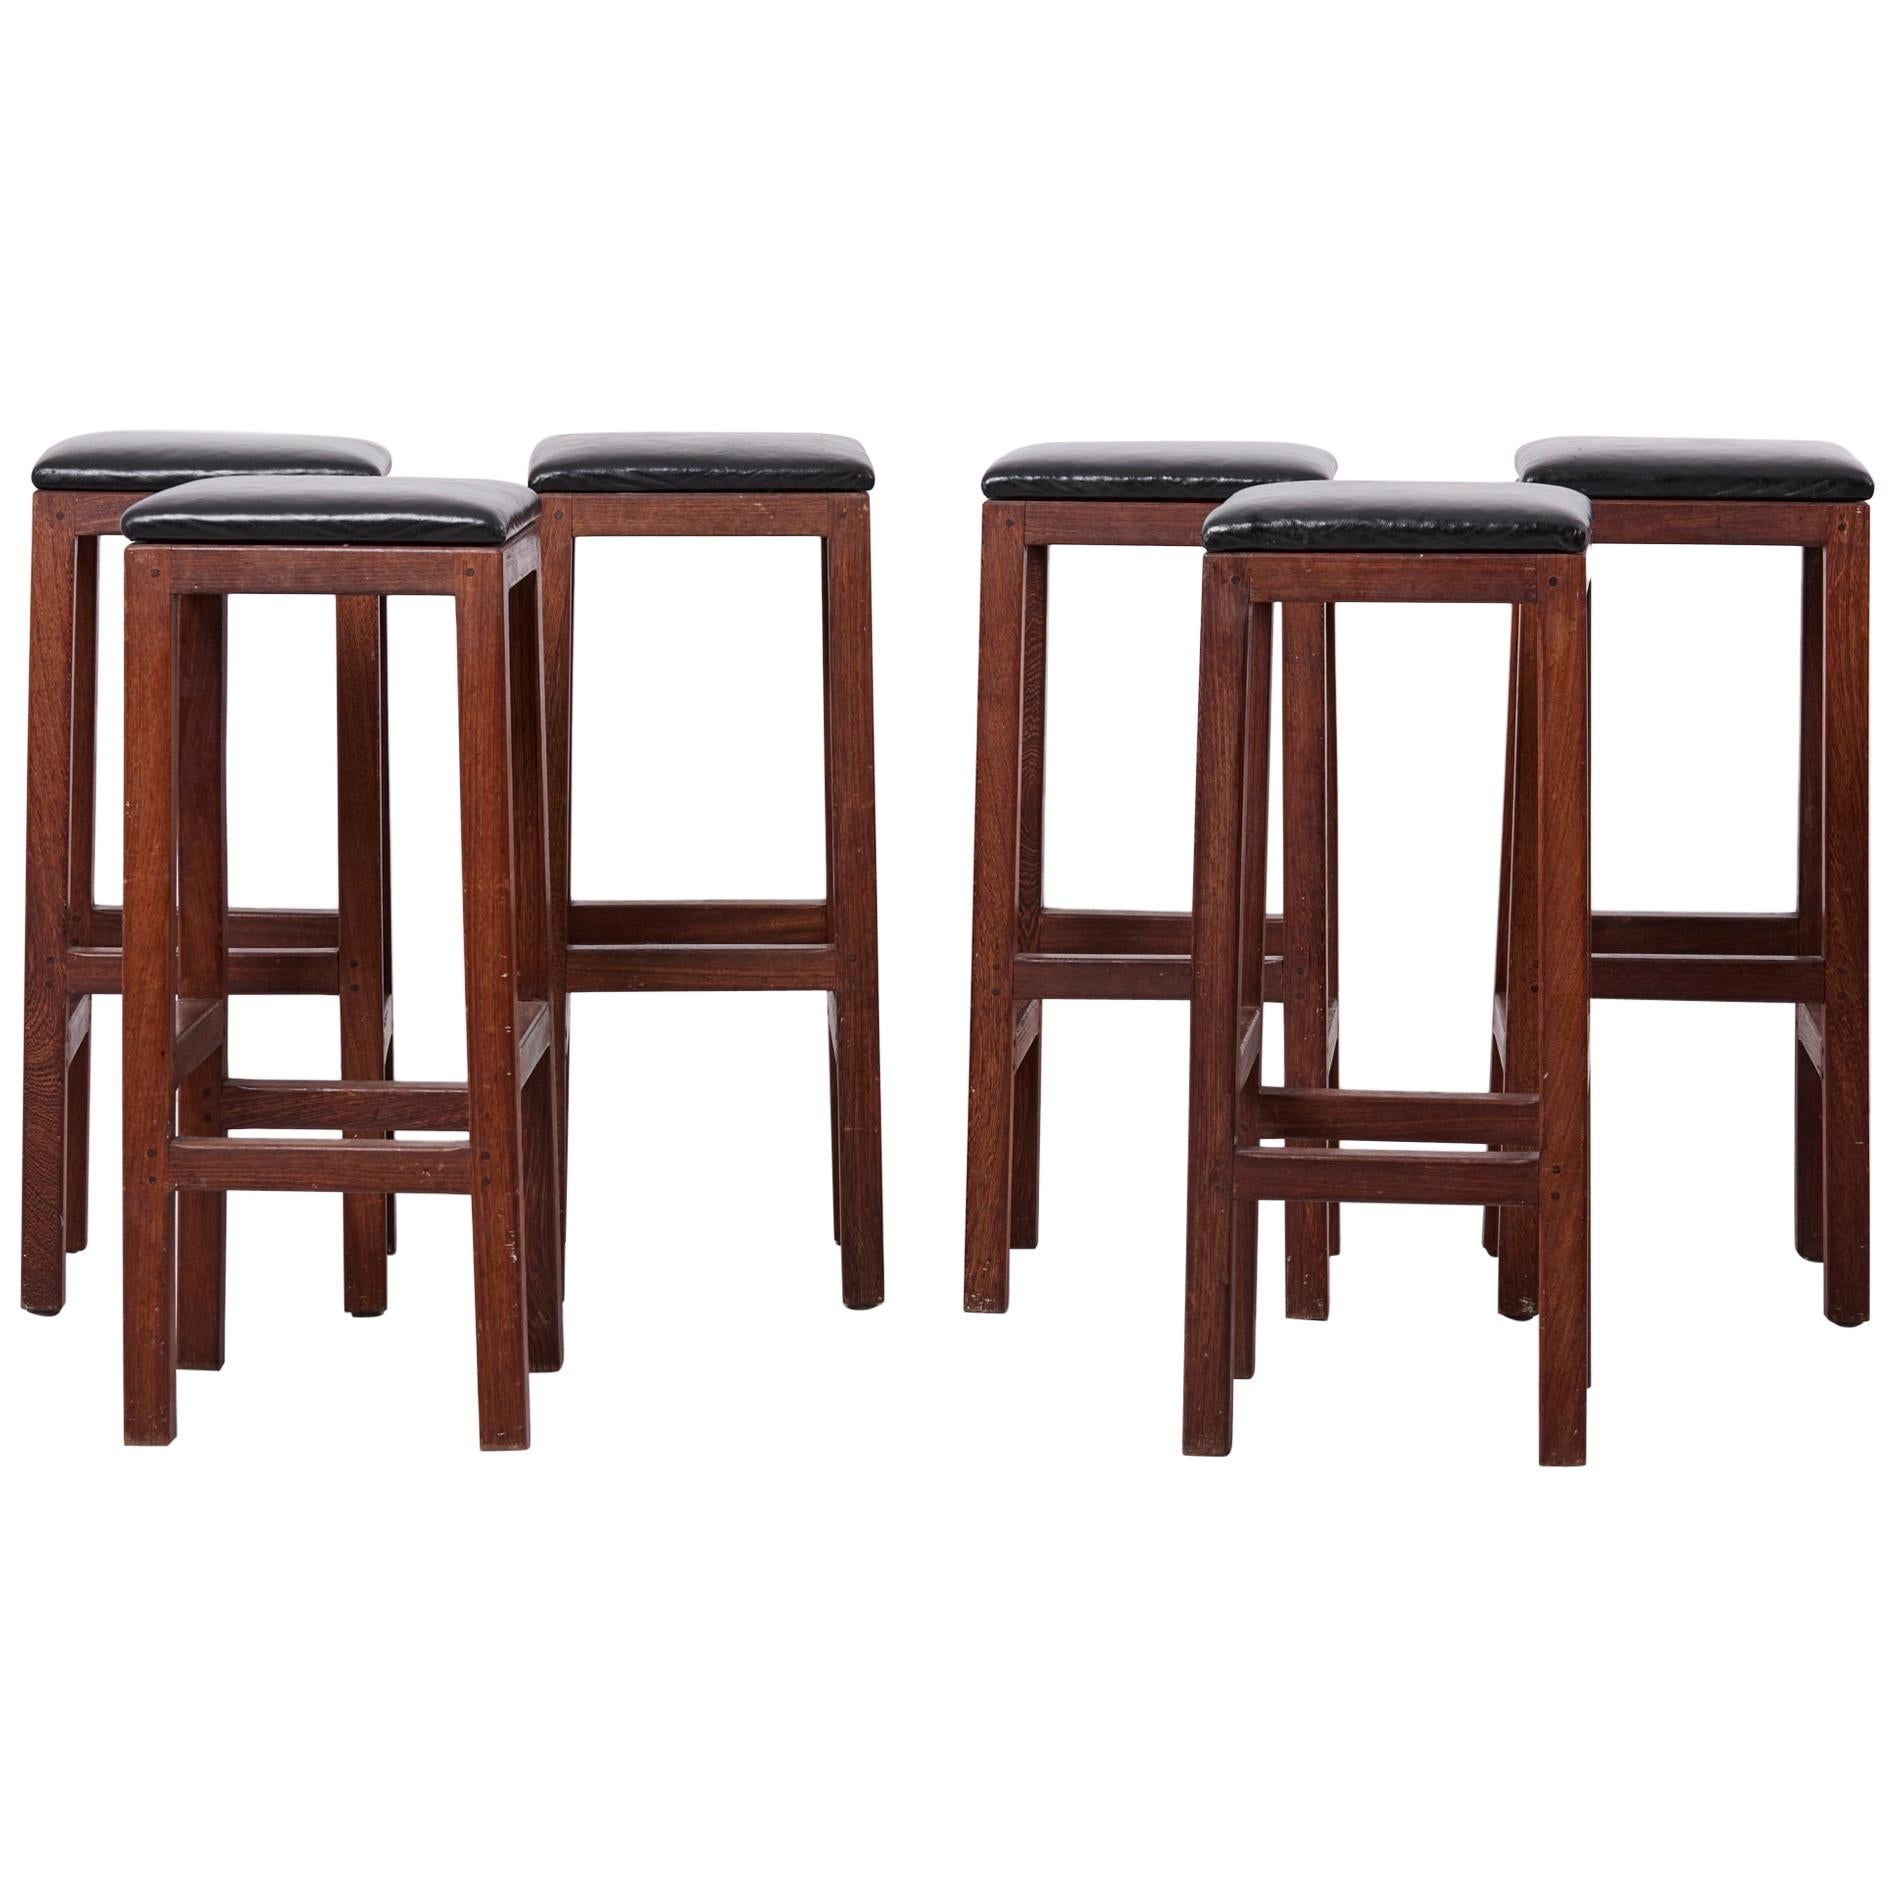 Set of 6 Wood and Leather Mid-Century Modern Barstools, 1960s